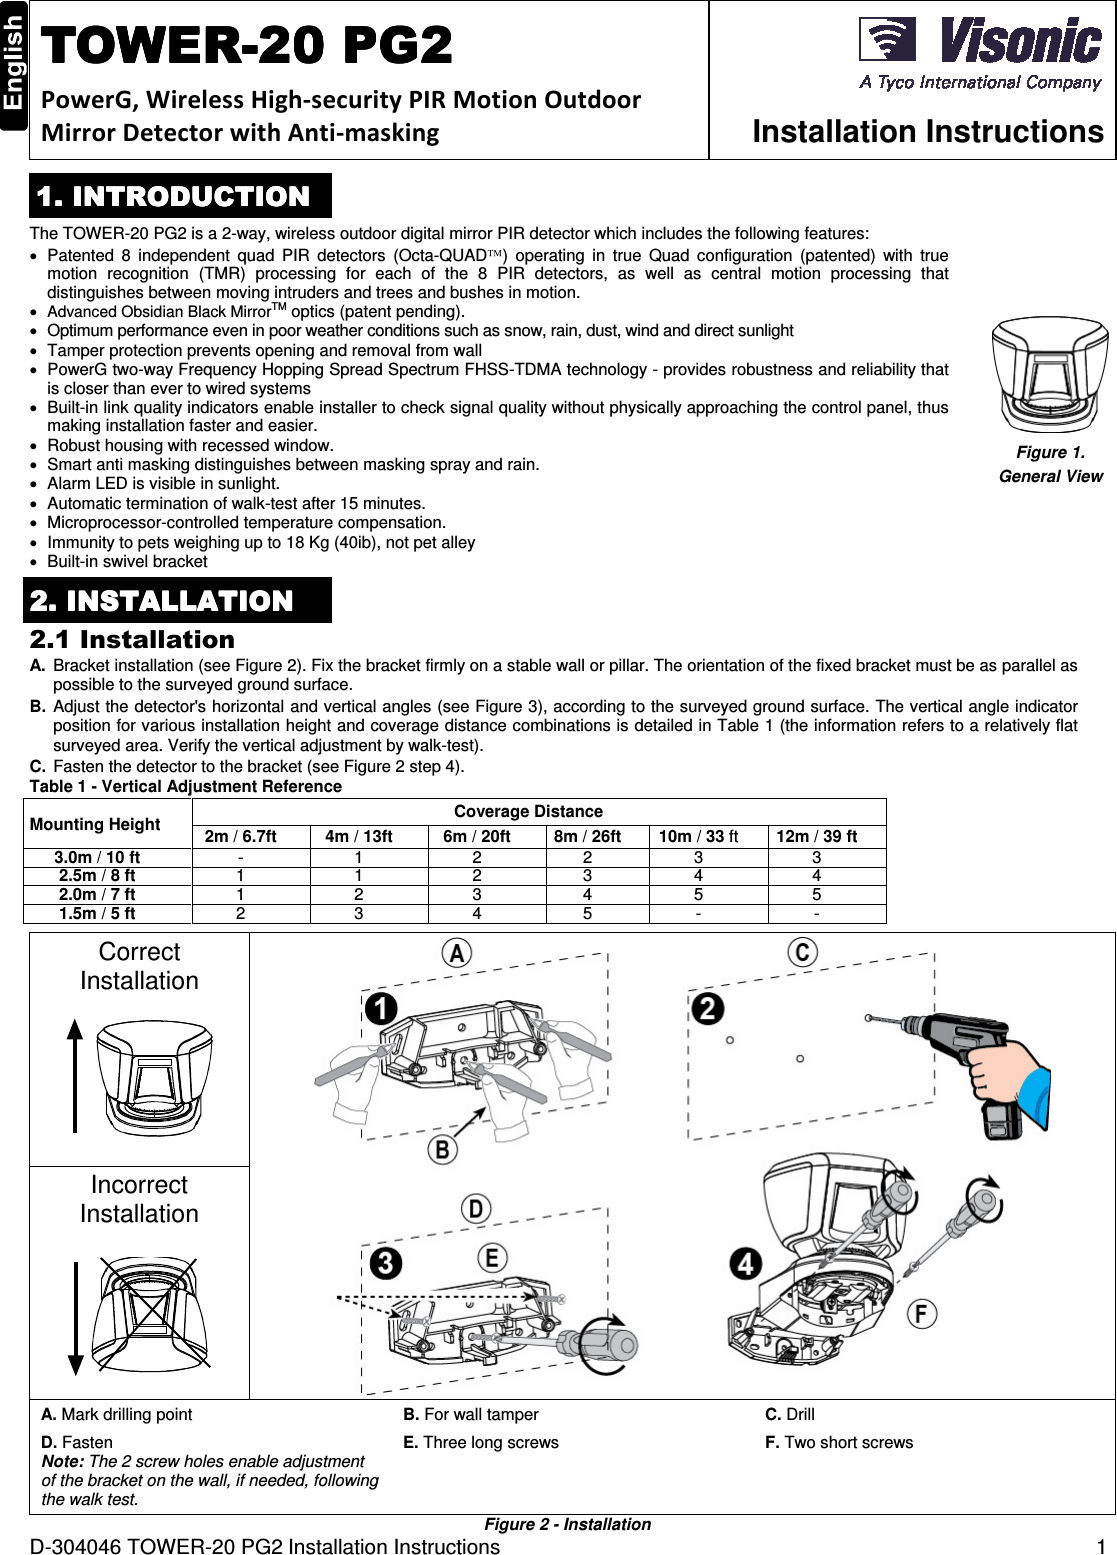 D-304046 TOWER-20 PG2 Installation Instructions  1  TOWERTOWERTOWERTOWER----20 PG220 PG220 PG220 PG2    PowerG, Wireless High-security PIR Motion Outdoor Mirror Detector with Anti-masking  Installation Instructions 1. INTRODUCTION1. INTRODUCTION1. INTRODUCTION1. INTRODUCTION    The TOWER-20 PG2 is a 2-way, wireless outdoor digital mirror PIR detector which includes the following features: •  Patented  8  independent  quad  PIR  detectors  (Octa-QUAD)  operating  in  true  Quad  configuration  (patented)  with  true motion  recognition  (TMR)  processing  for  each  of  the  8  PIR  detectors,  as  well  as  central  motion  processing  that distinguishes between moving intruders and trees and bushes in motion. • Advanced Obsidian Black MirrorTM optics (patent pending). •  Optimum performance even in poor weather conditions such as snow, rain, dust, wind and direct sunlight •  Tamper protection prevents opening and removal from wall •  PowerG two-way Frequency Hopping Spread Spectrum FHSS-TDMA technology - provides robustness and reliability that is closer than ever to wired systems •  Built-in link quality indicators enable installer to check signal quality without physically approaching the control panel, thus making installation faster and easier. •  Robust housing with recessed window. •  Smart anti masking distinguishes between masking spray and rain. •  Alarm LED is visible in sunlight. •  Automatic termination of walk-test after 15 minutes. •  Microprocessor-controlled temperature compensation. •  Immunity to pets weighing up to 18 Kg (40ib), not pet alley • Built-in swivel bracket  Figure 1.  General View 2222. . . . INSTALLATIONINSTALLATIONINSTALLATIONINSTALLATION    2.1 Installation A.  Bracket installation (see Figure 2). Fix the bracket firmly on a stable wall or pillar. The orientation of the fixed bracket must be as parallel as possible to the surveyed ground surface. B. Adjust the detector&apos;s horizontal and vertical angles (see Figure 3), according to the surveyed ground surface. The vertical angle indicator position for various installation height and coverage distance combinations is detailed in Table 1 (the information refers to a relatively flat surveyed area. Verify the vertical adjustment by walk-test). C.  Fasten the detector to the bracket (see Figure 2 step 4). Table 1 - Vertical Adjustment Reference Mounting Height  Coverage Distance 2m / 6.7ft 4m / 13ft 6m / 20ft 8m / 26ft 10m / 33 ft  12m / 39 ft 3.0m / 10 ft - 1 2 2 3 3 2.5m / 8 ft 1 1 2 3 4 4 2.0m / 7 ft 1 2 3 4 5 5 1.5m / 5 ft 2 3 4 5 - -  Correct Installation   Incorrect Installation  A. Mark drilling point B. For wall tamper  C. Drill D. Fasten Note: The 2 screw holes enable adjustment of the bracket on the wall, if needed, following the walk test. E. Three long screws  F. Two short screws Figure 2 - Installation 